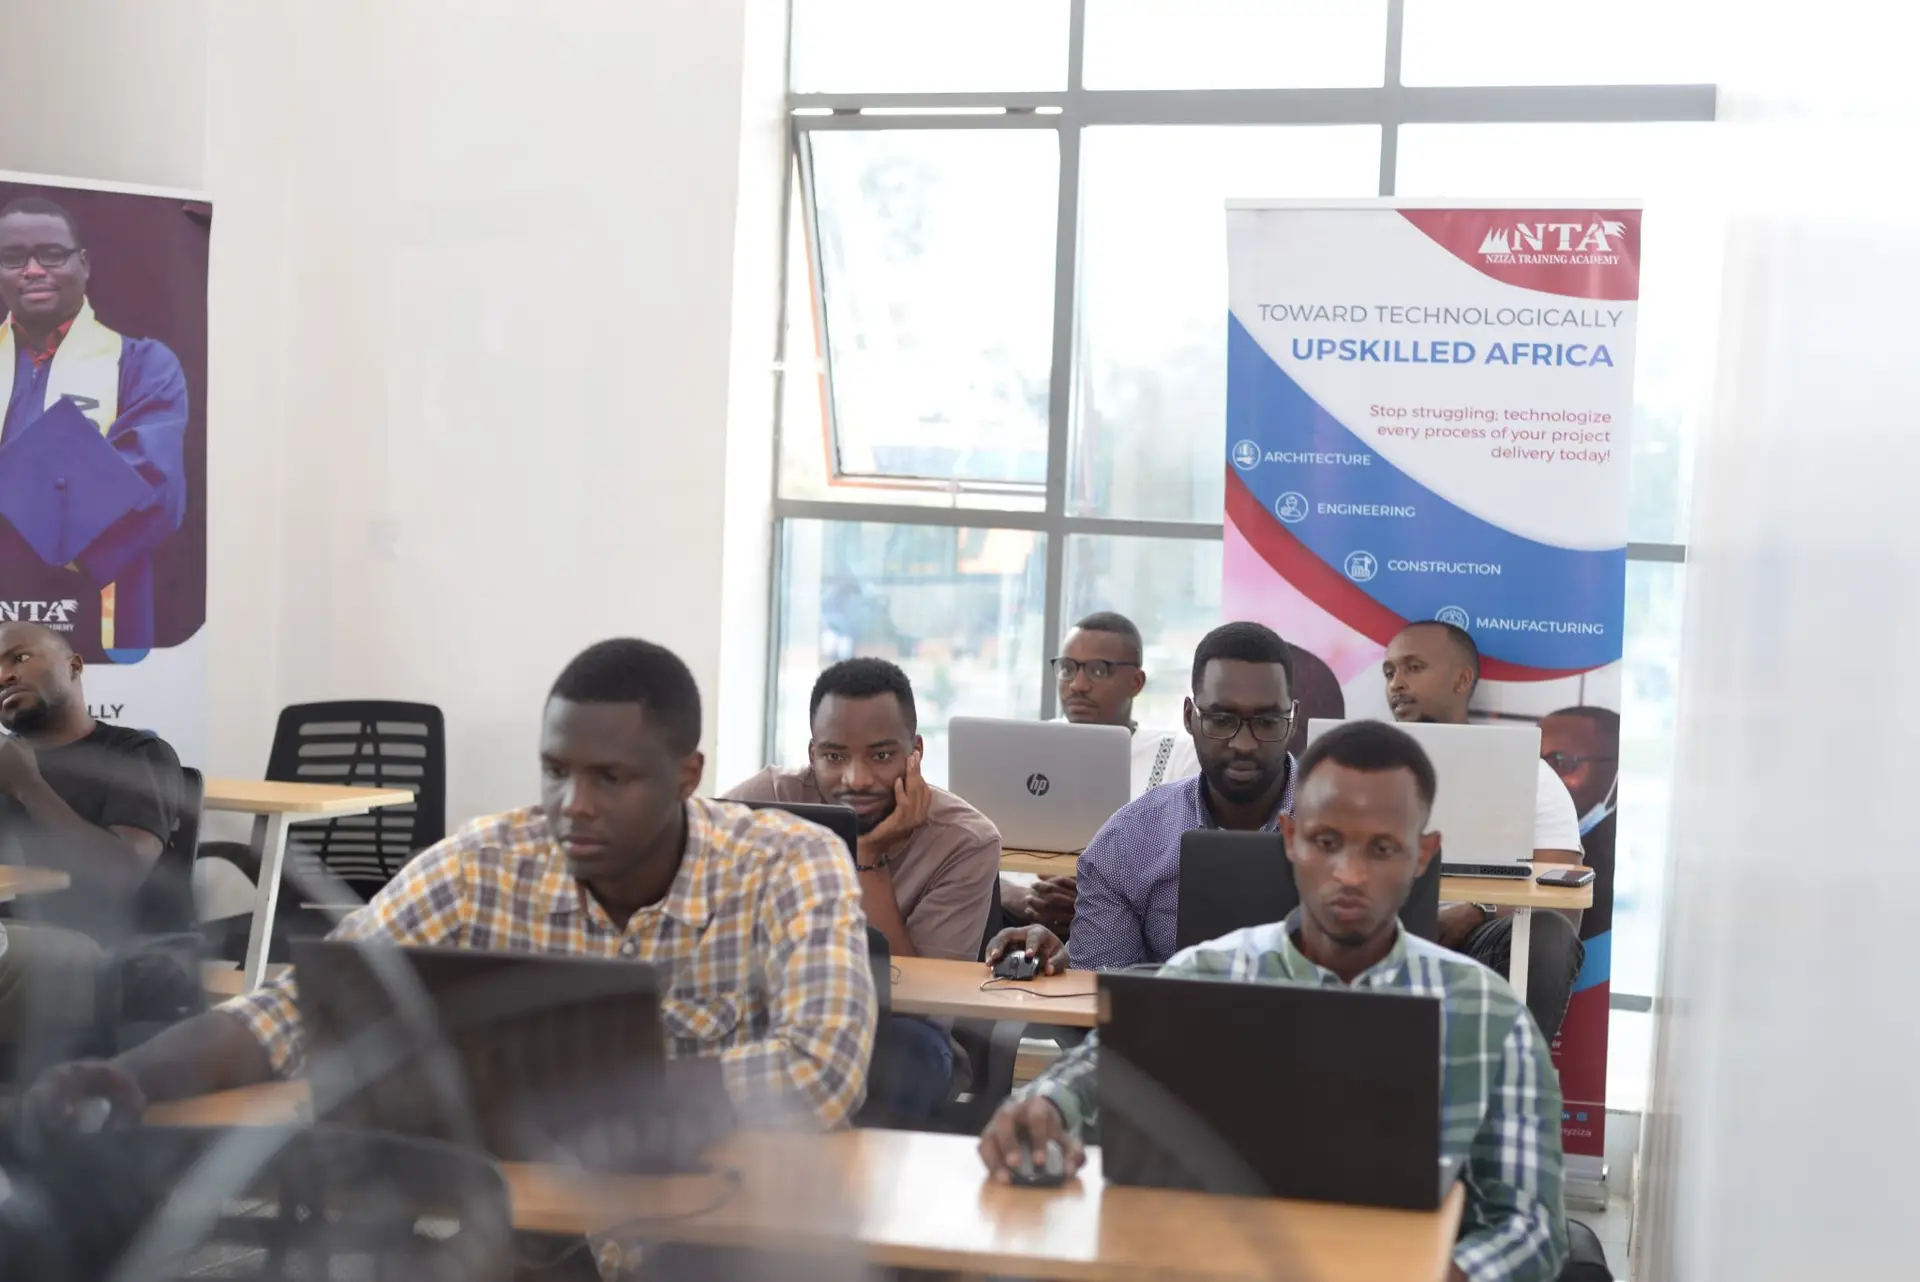 Focused group of African male professionals working on laptops in a bright classroom with educational banners, including one promoting technological upskilling